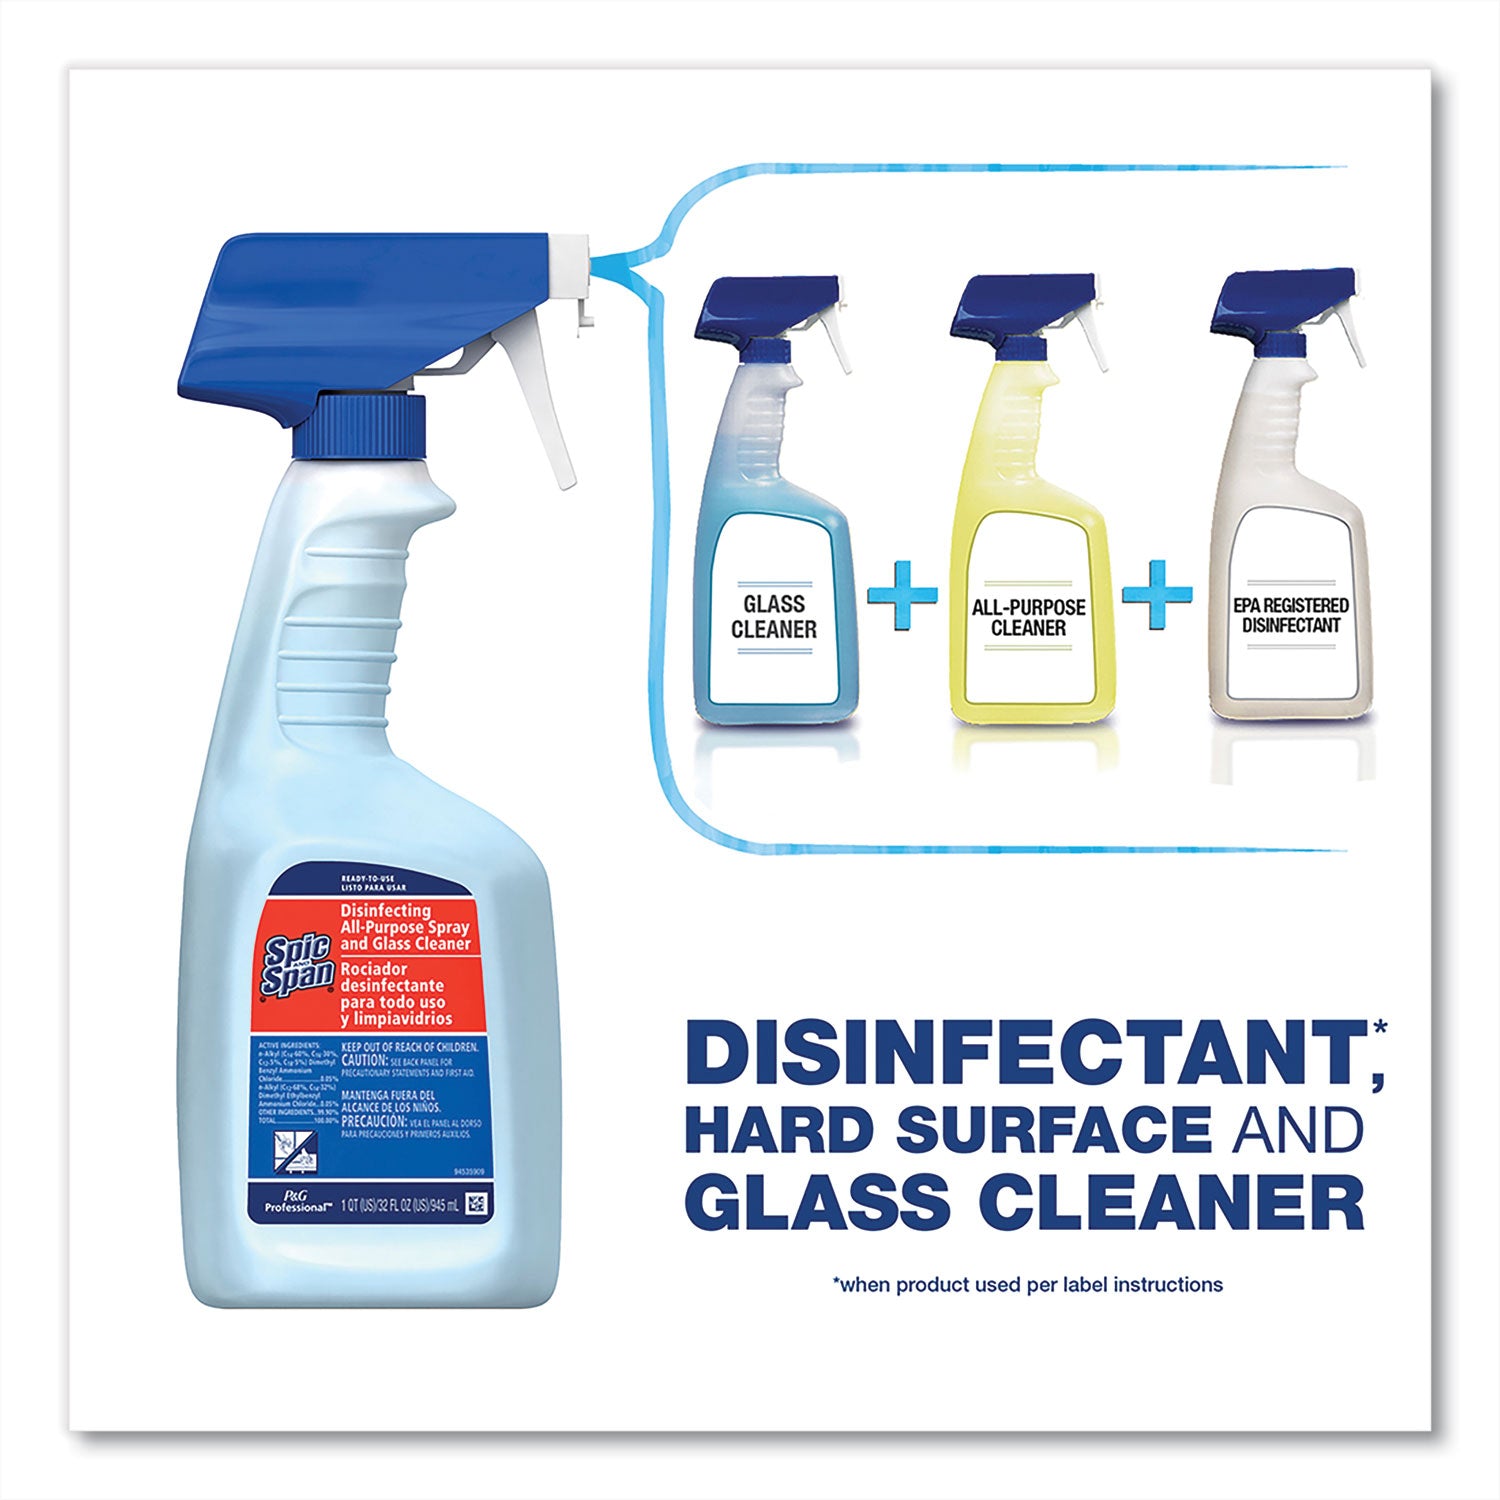 disinfecting-all-purpose-spray-and-glass-cleaner-fresh-scent-32-oz-spray-bottle-6-carton_pgc75353 - 5